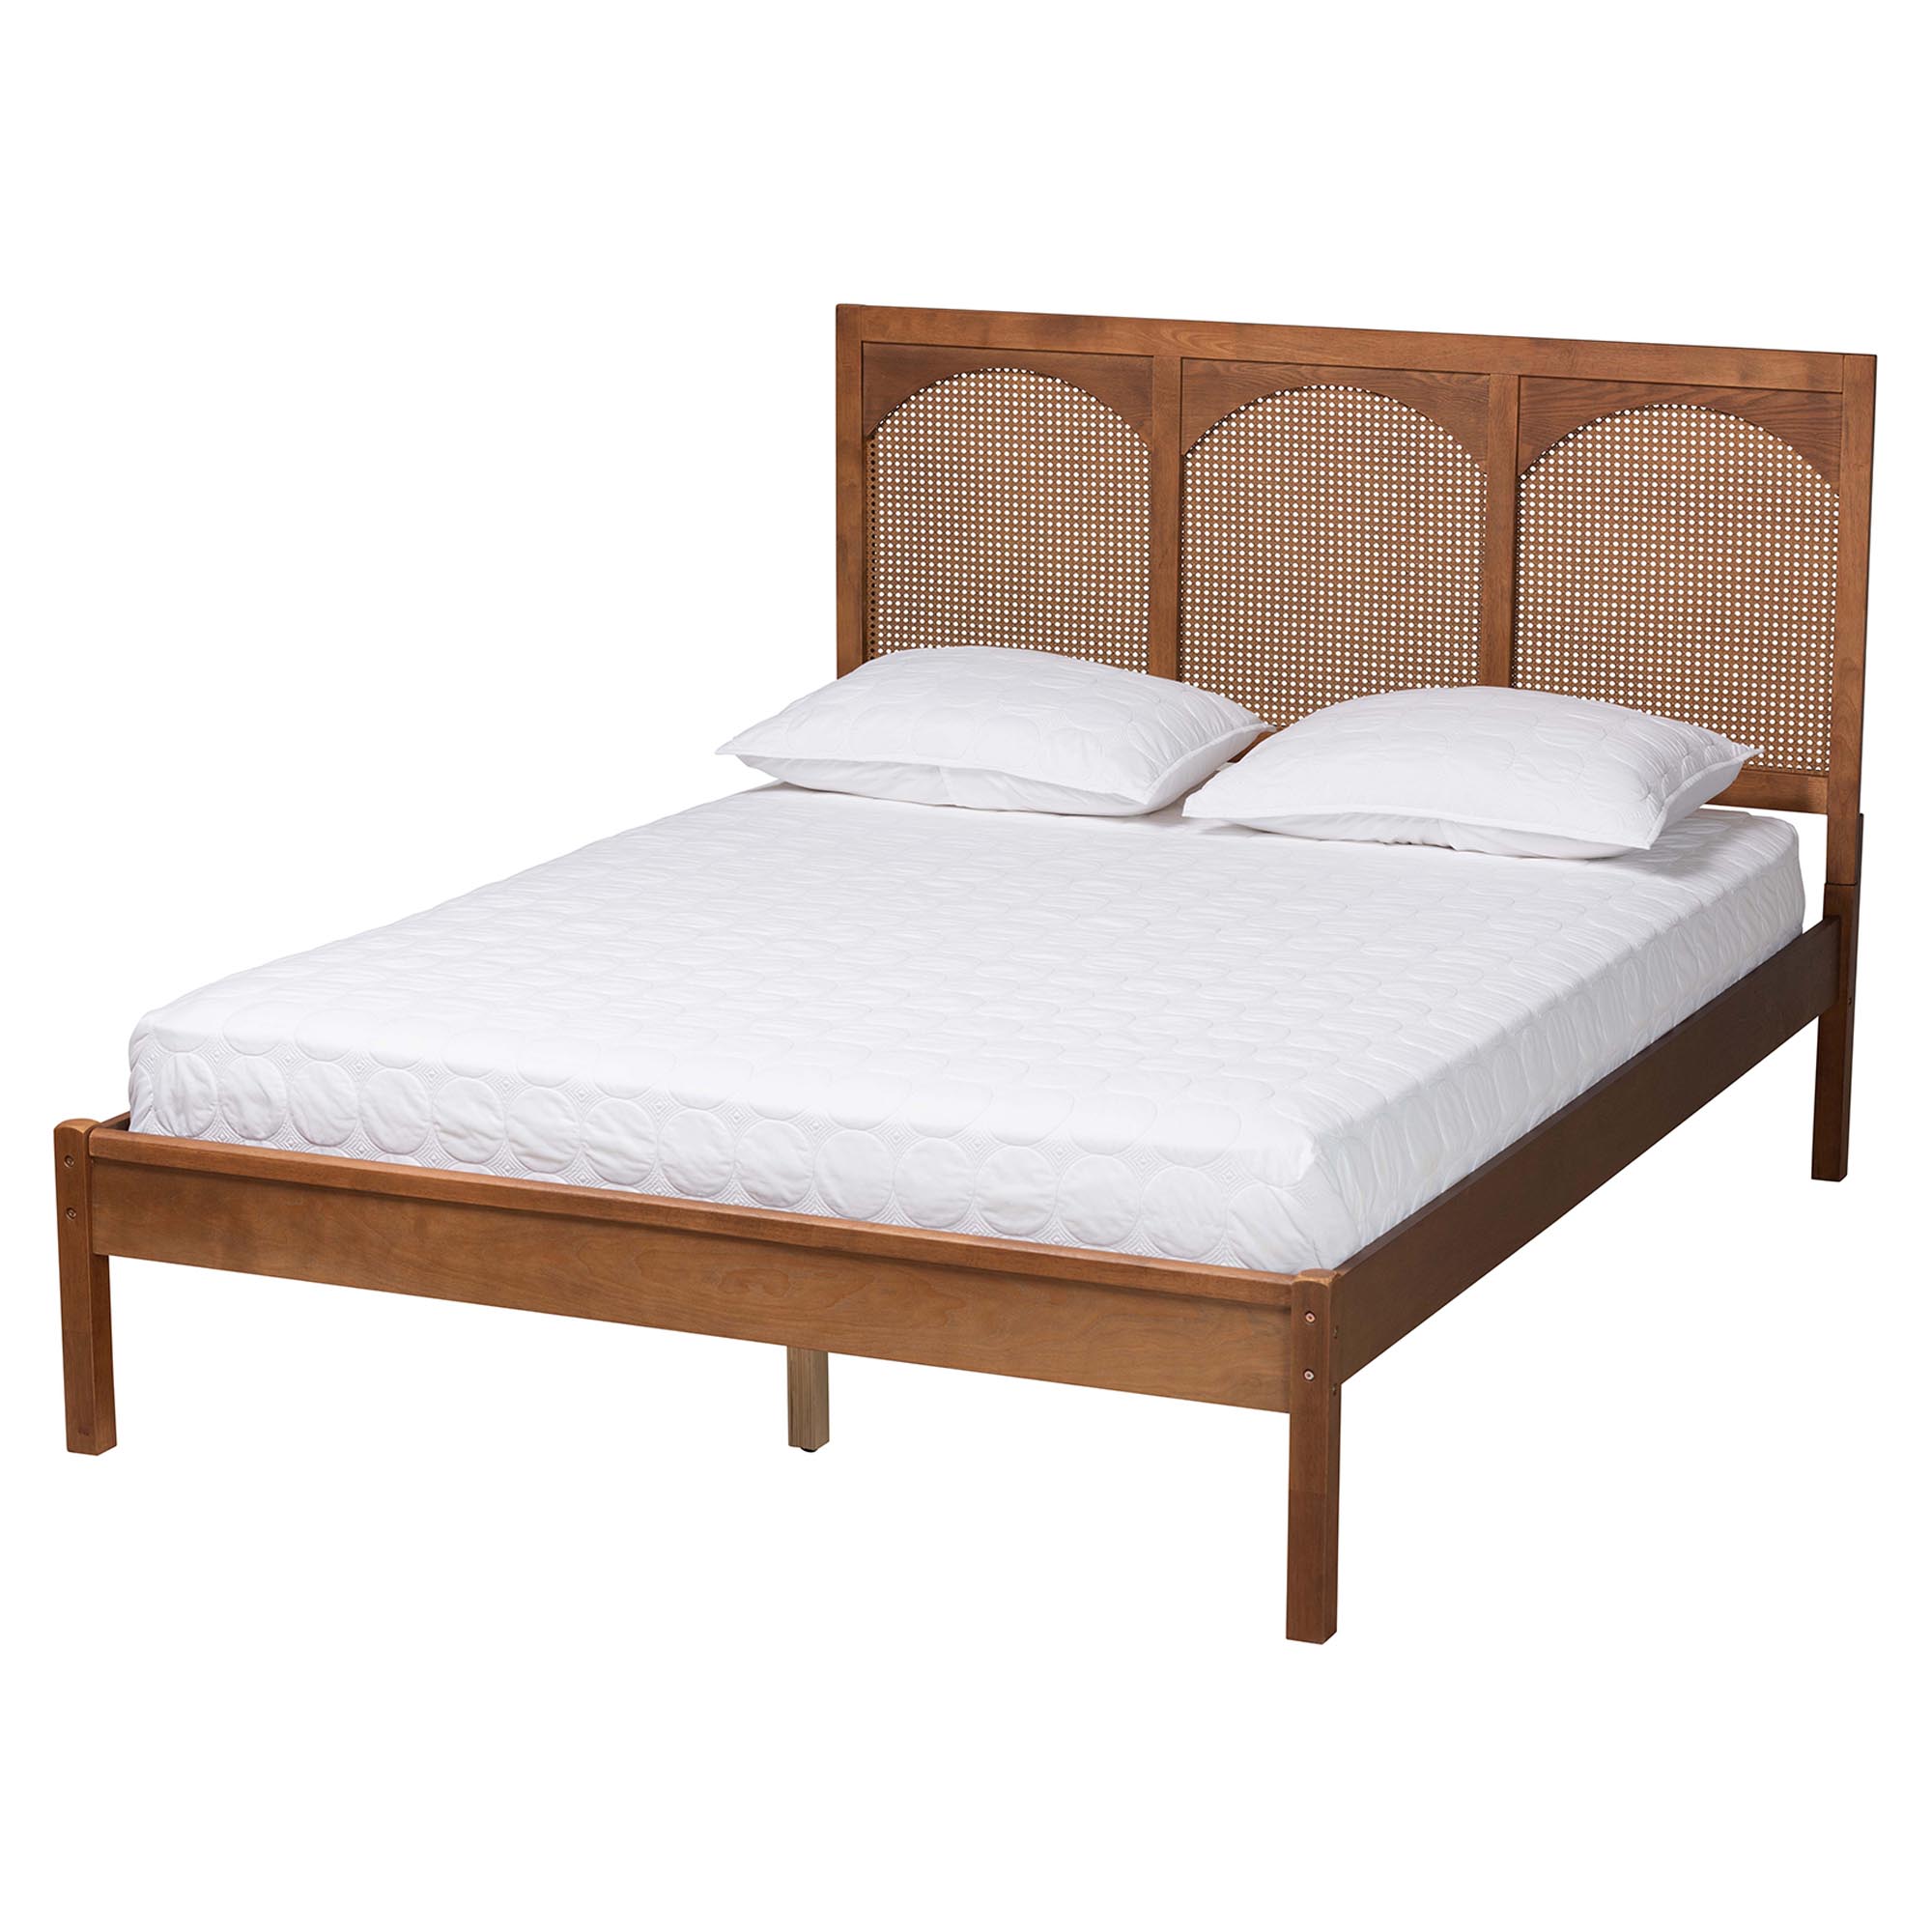 Baxton Studio Blossom Classic and Traditional Ash Walnut Finished Wood and Rattan Queen Size Platform Bed